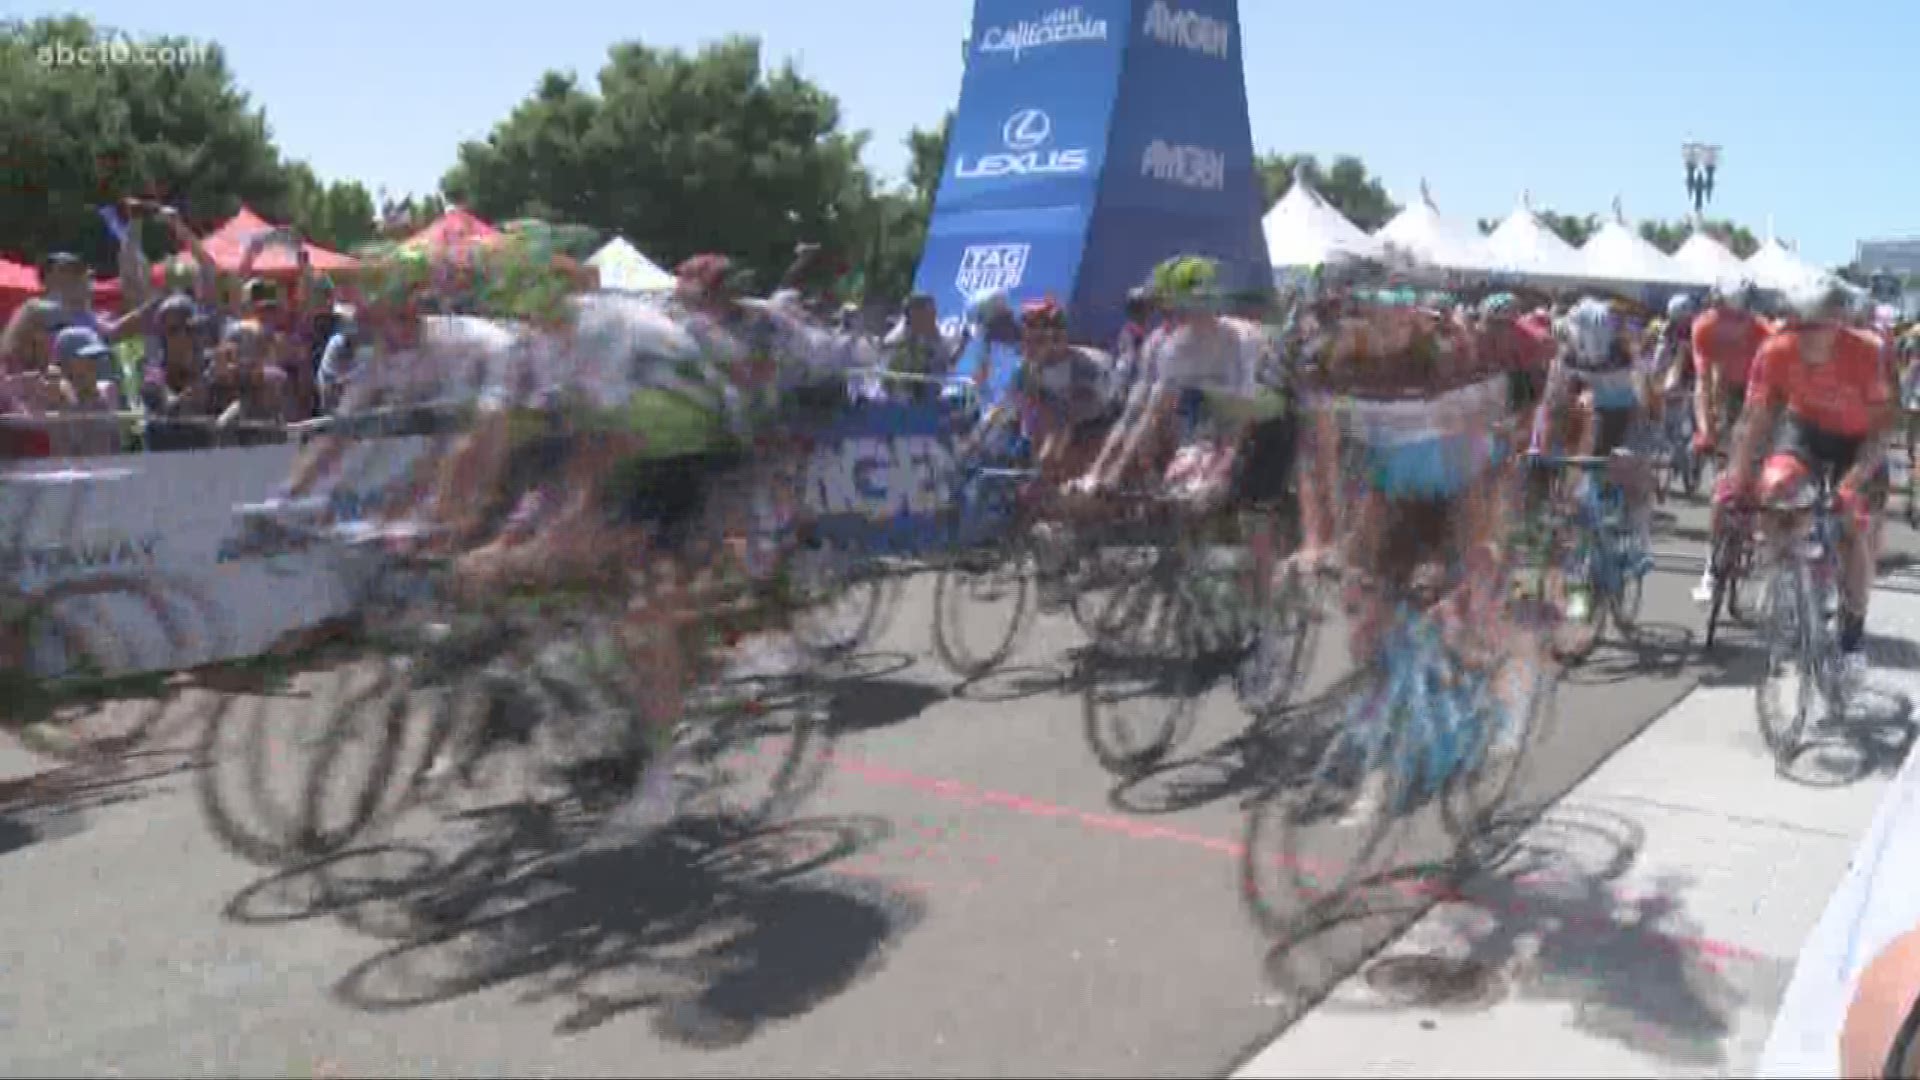 The wheels will be returning to Downtown Stockton when Stage 3 of the Amgen Tour starts on Tuesday, May 14, 2019.